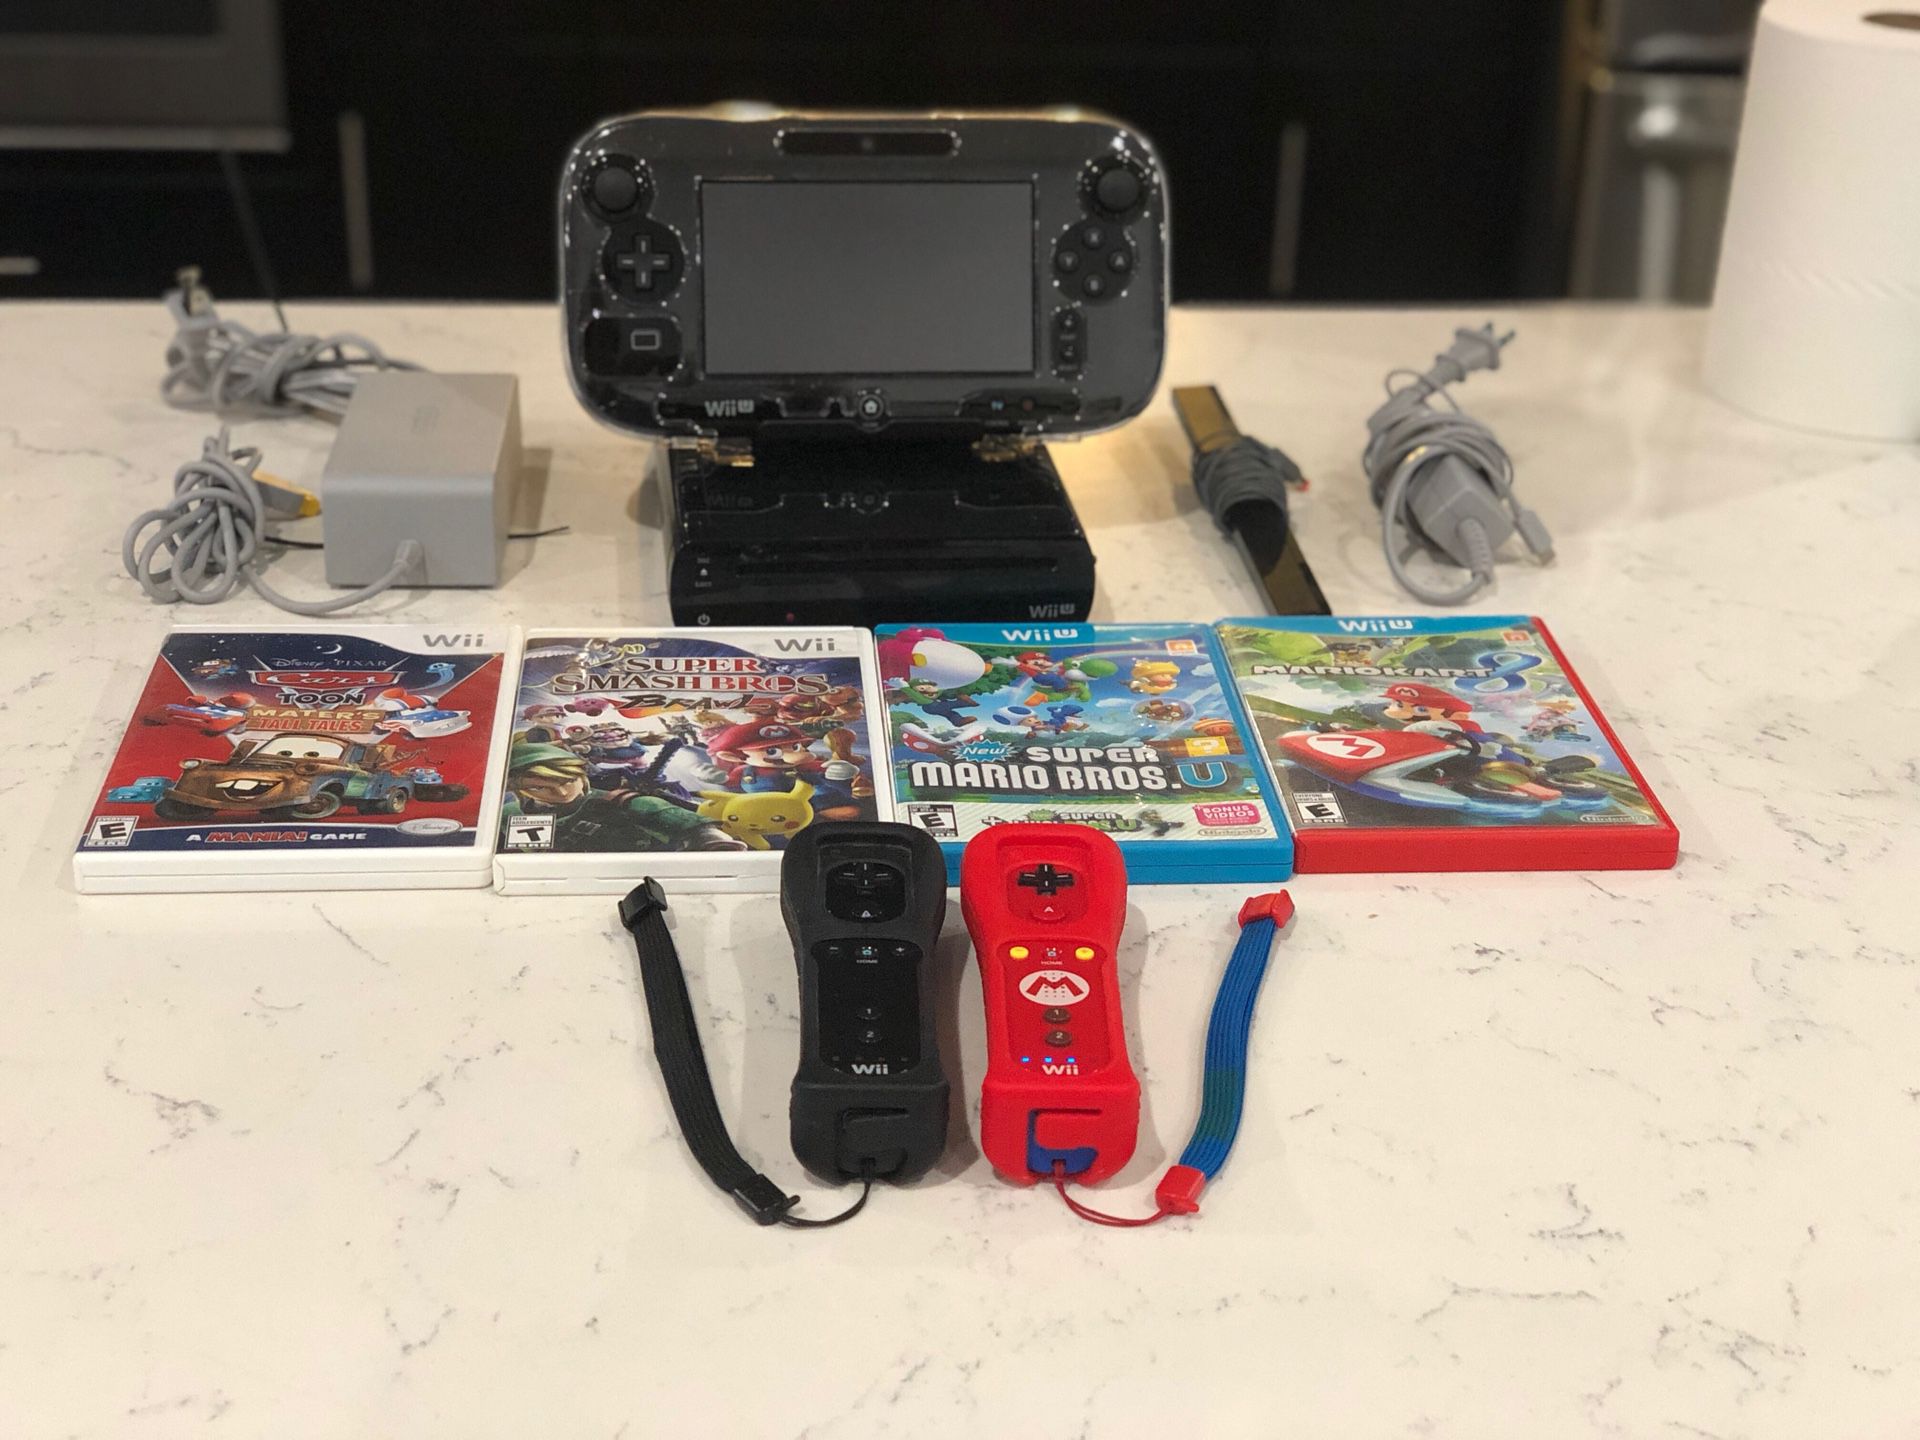 Nintendo Wii U with games shown. Super MARIO 3D world also included